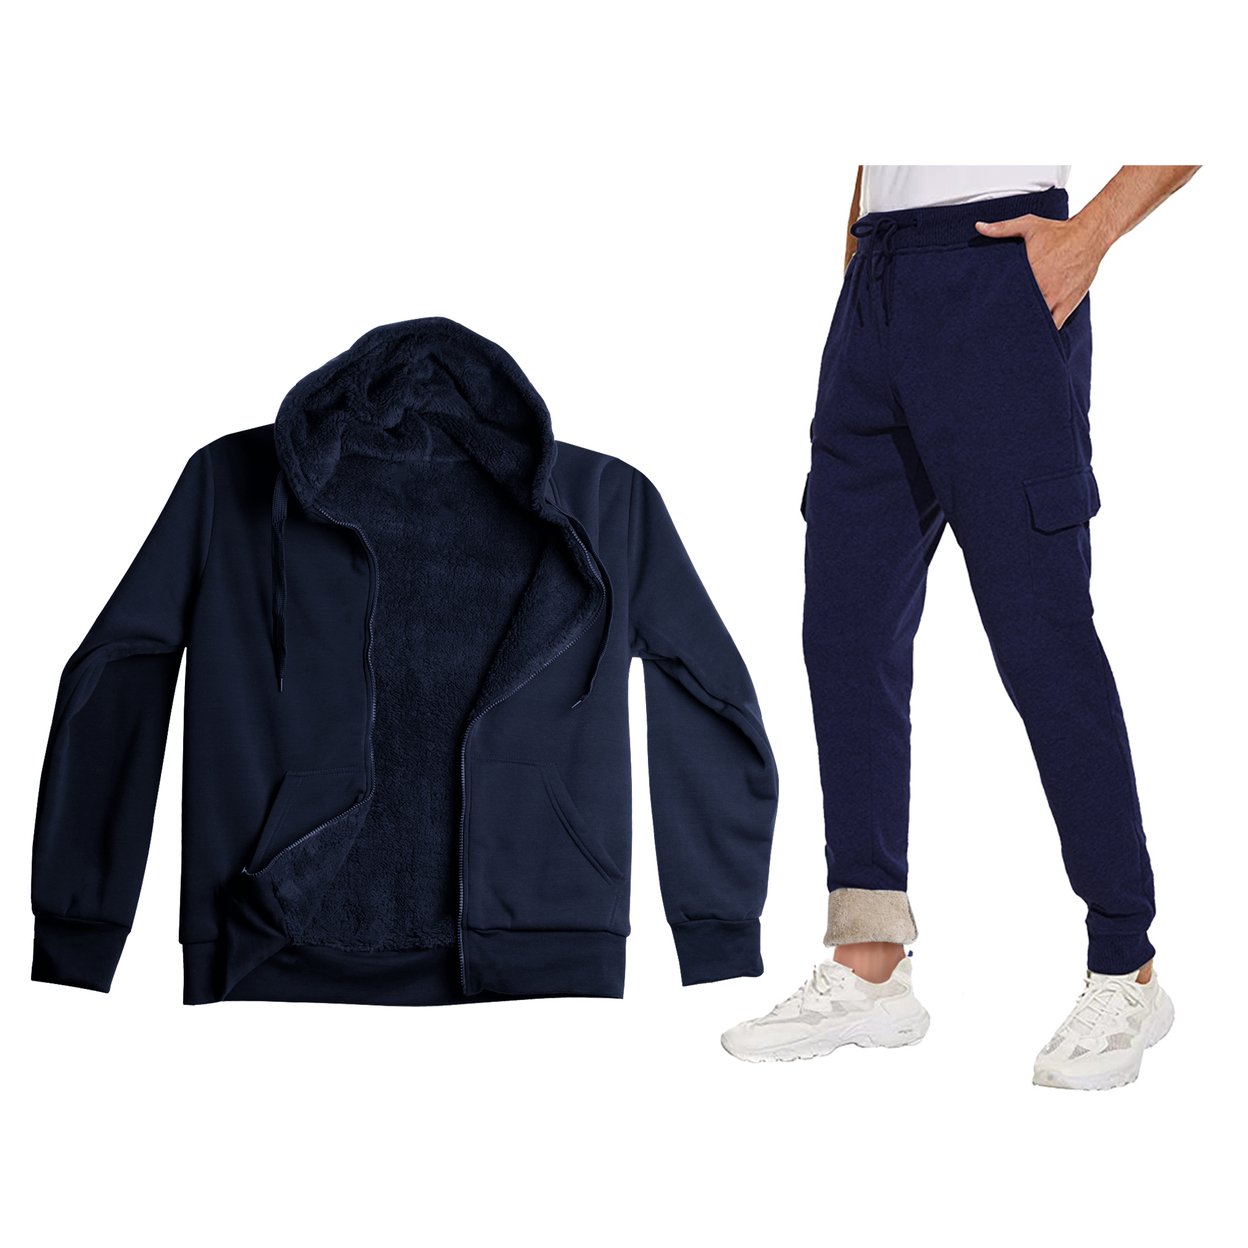 Men's Big & Tall Casual Super Soft Winter Warm Thick Sherpa Lined Sweatsuit Jogger Set - Navy, Xx-large